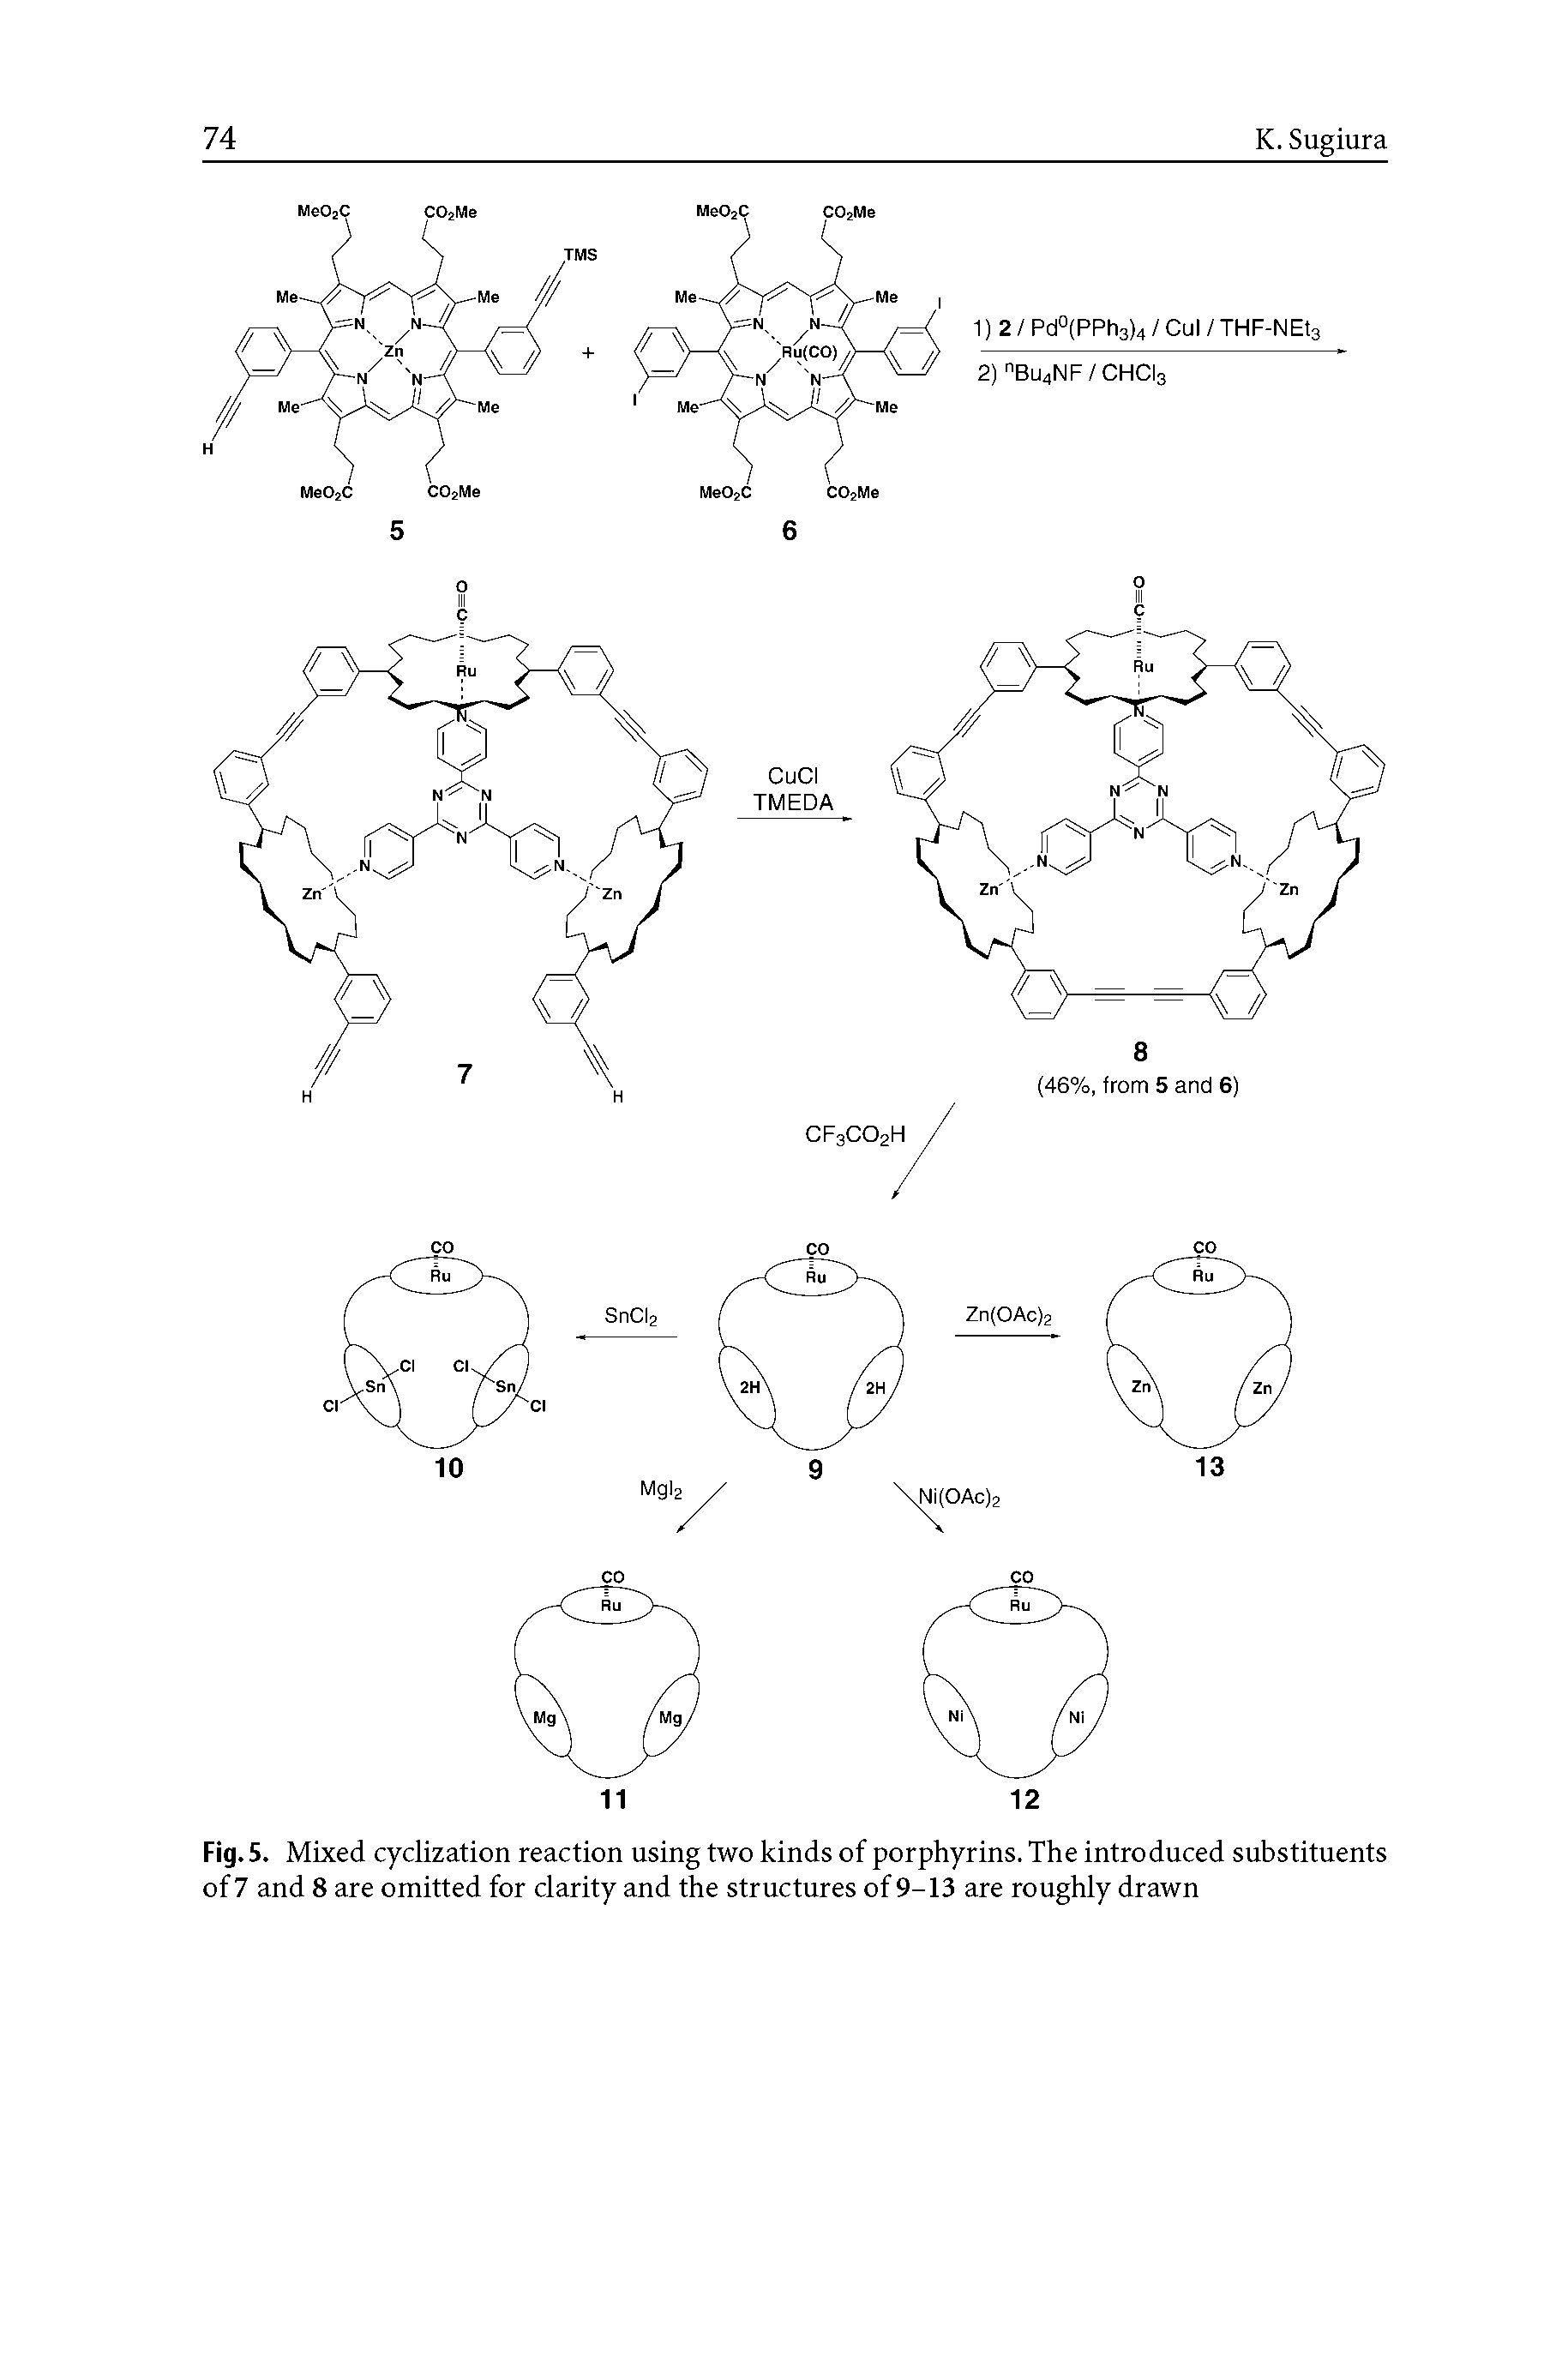 Fig. 5. Mixed cyclization reaction using two kinds of porphyrins. The introduced substituents of 7 and 8 are omitted for clarity and the structures of 9-13 are roughly drawn...